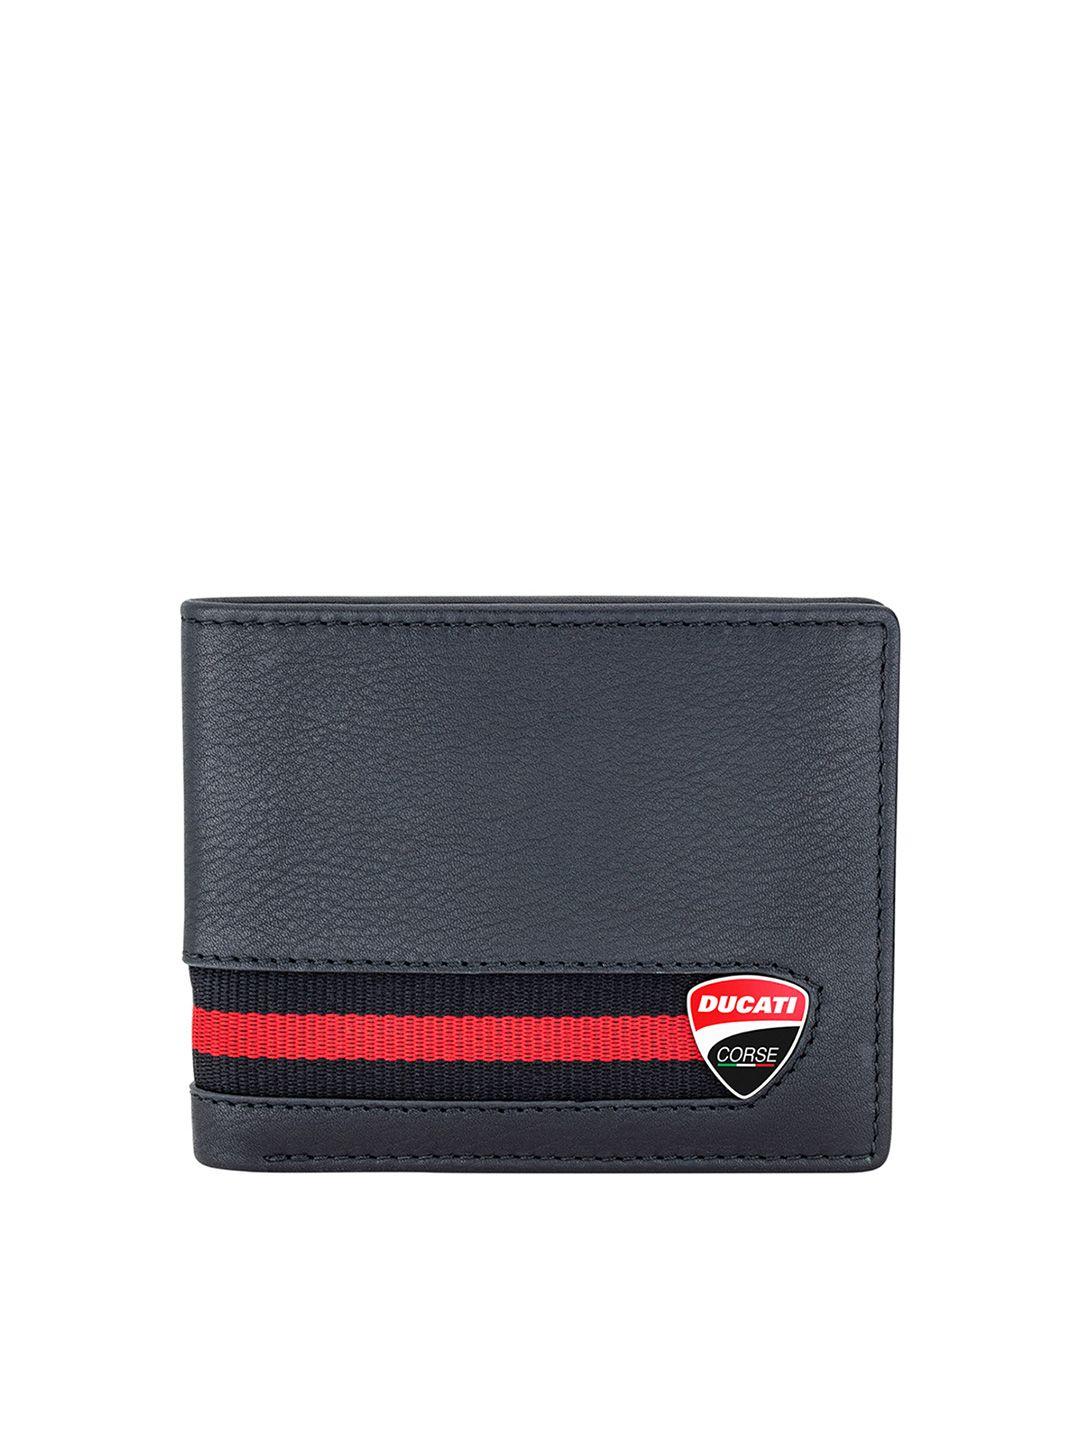 ducati corse men black & red leather two fold wallet